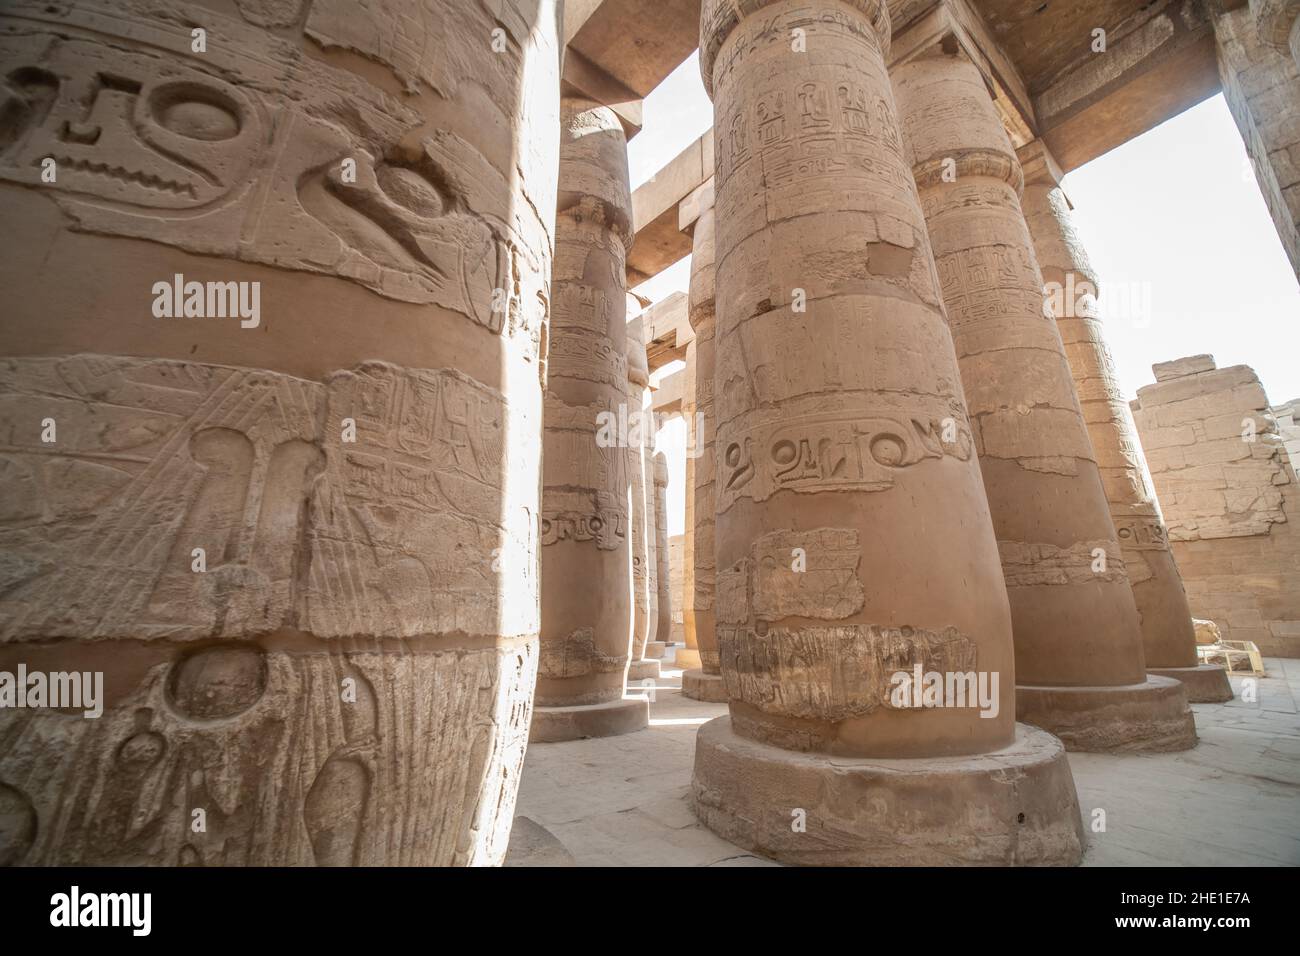 The stone pillars in the Hypostyle hall in Karnak temple, an ancient egyptian archeological site in Egypt. Stock Photo